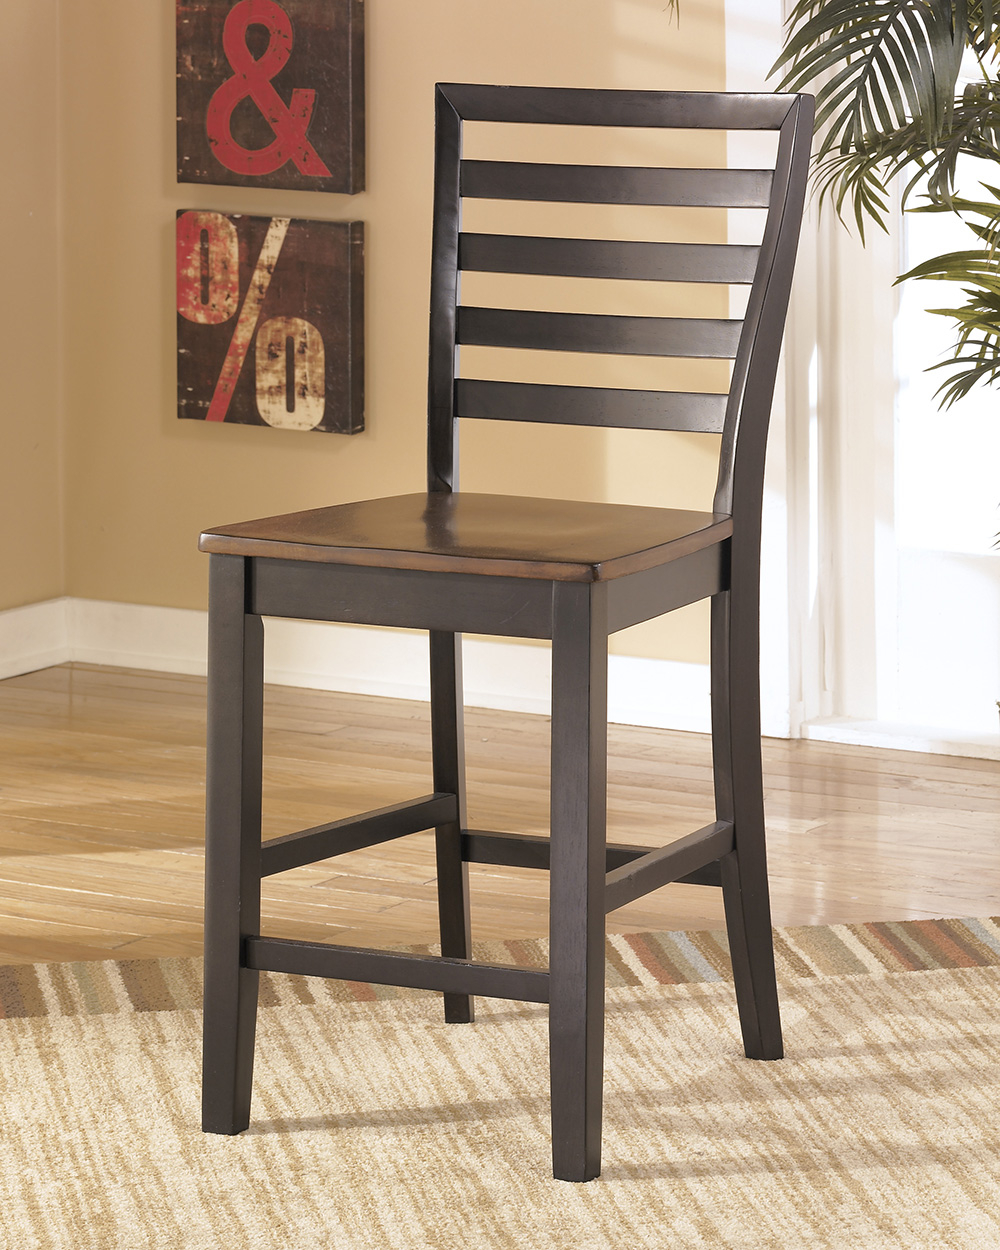 Alonzo Contemporary Set of two Barstools [Kitchen] MPN: 421-763D